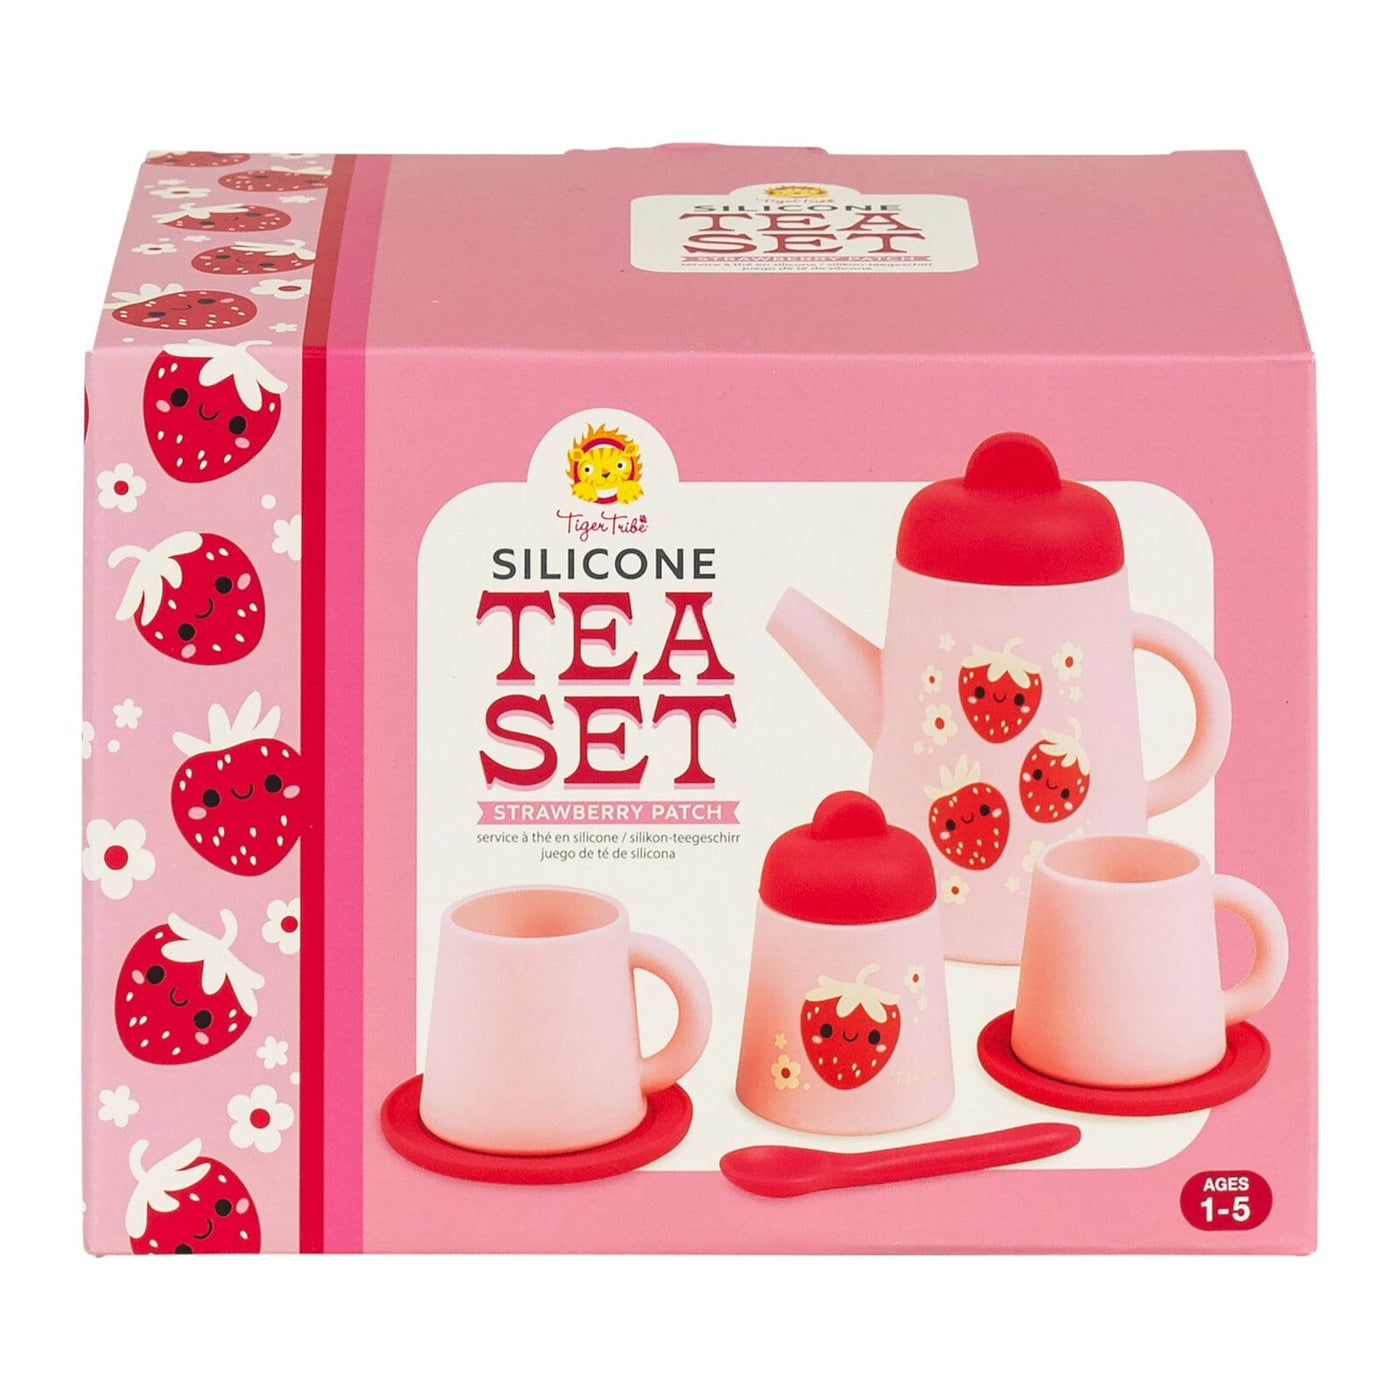 Tiger Tribe Silicone Tea Set - Strawberry Patch Toy Tiger Tribe 